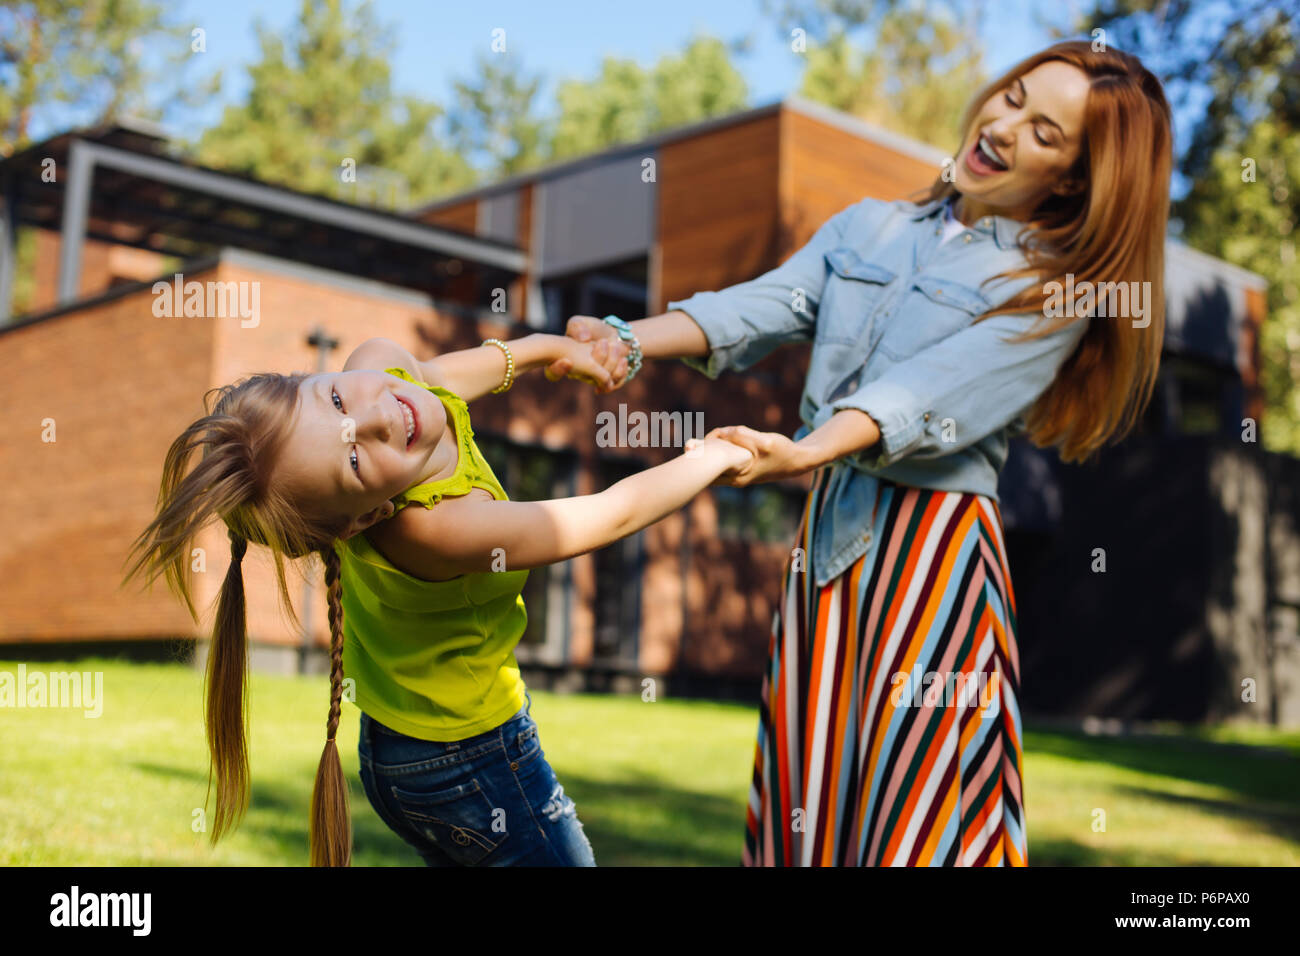 Exuberant girl spending time with her mummy Stock Photo